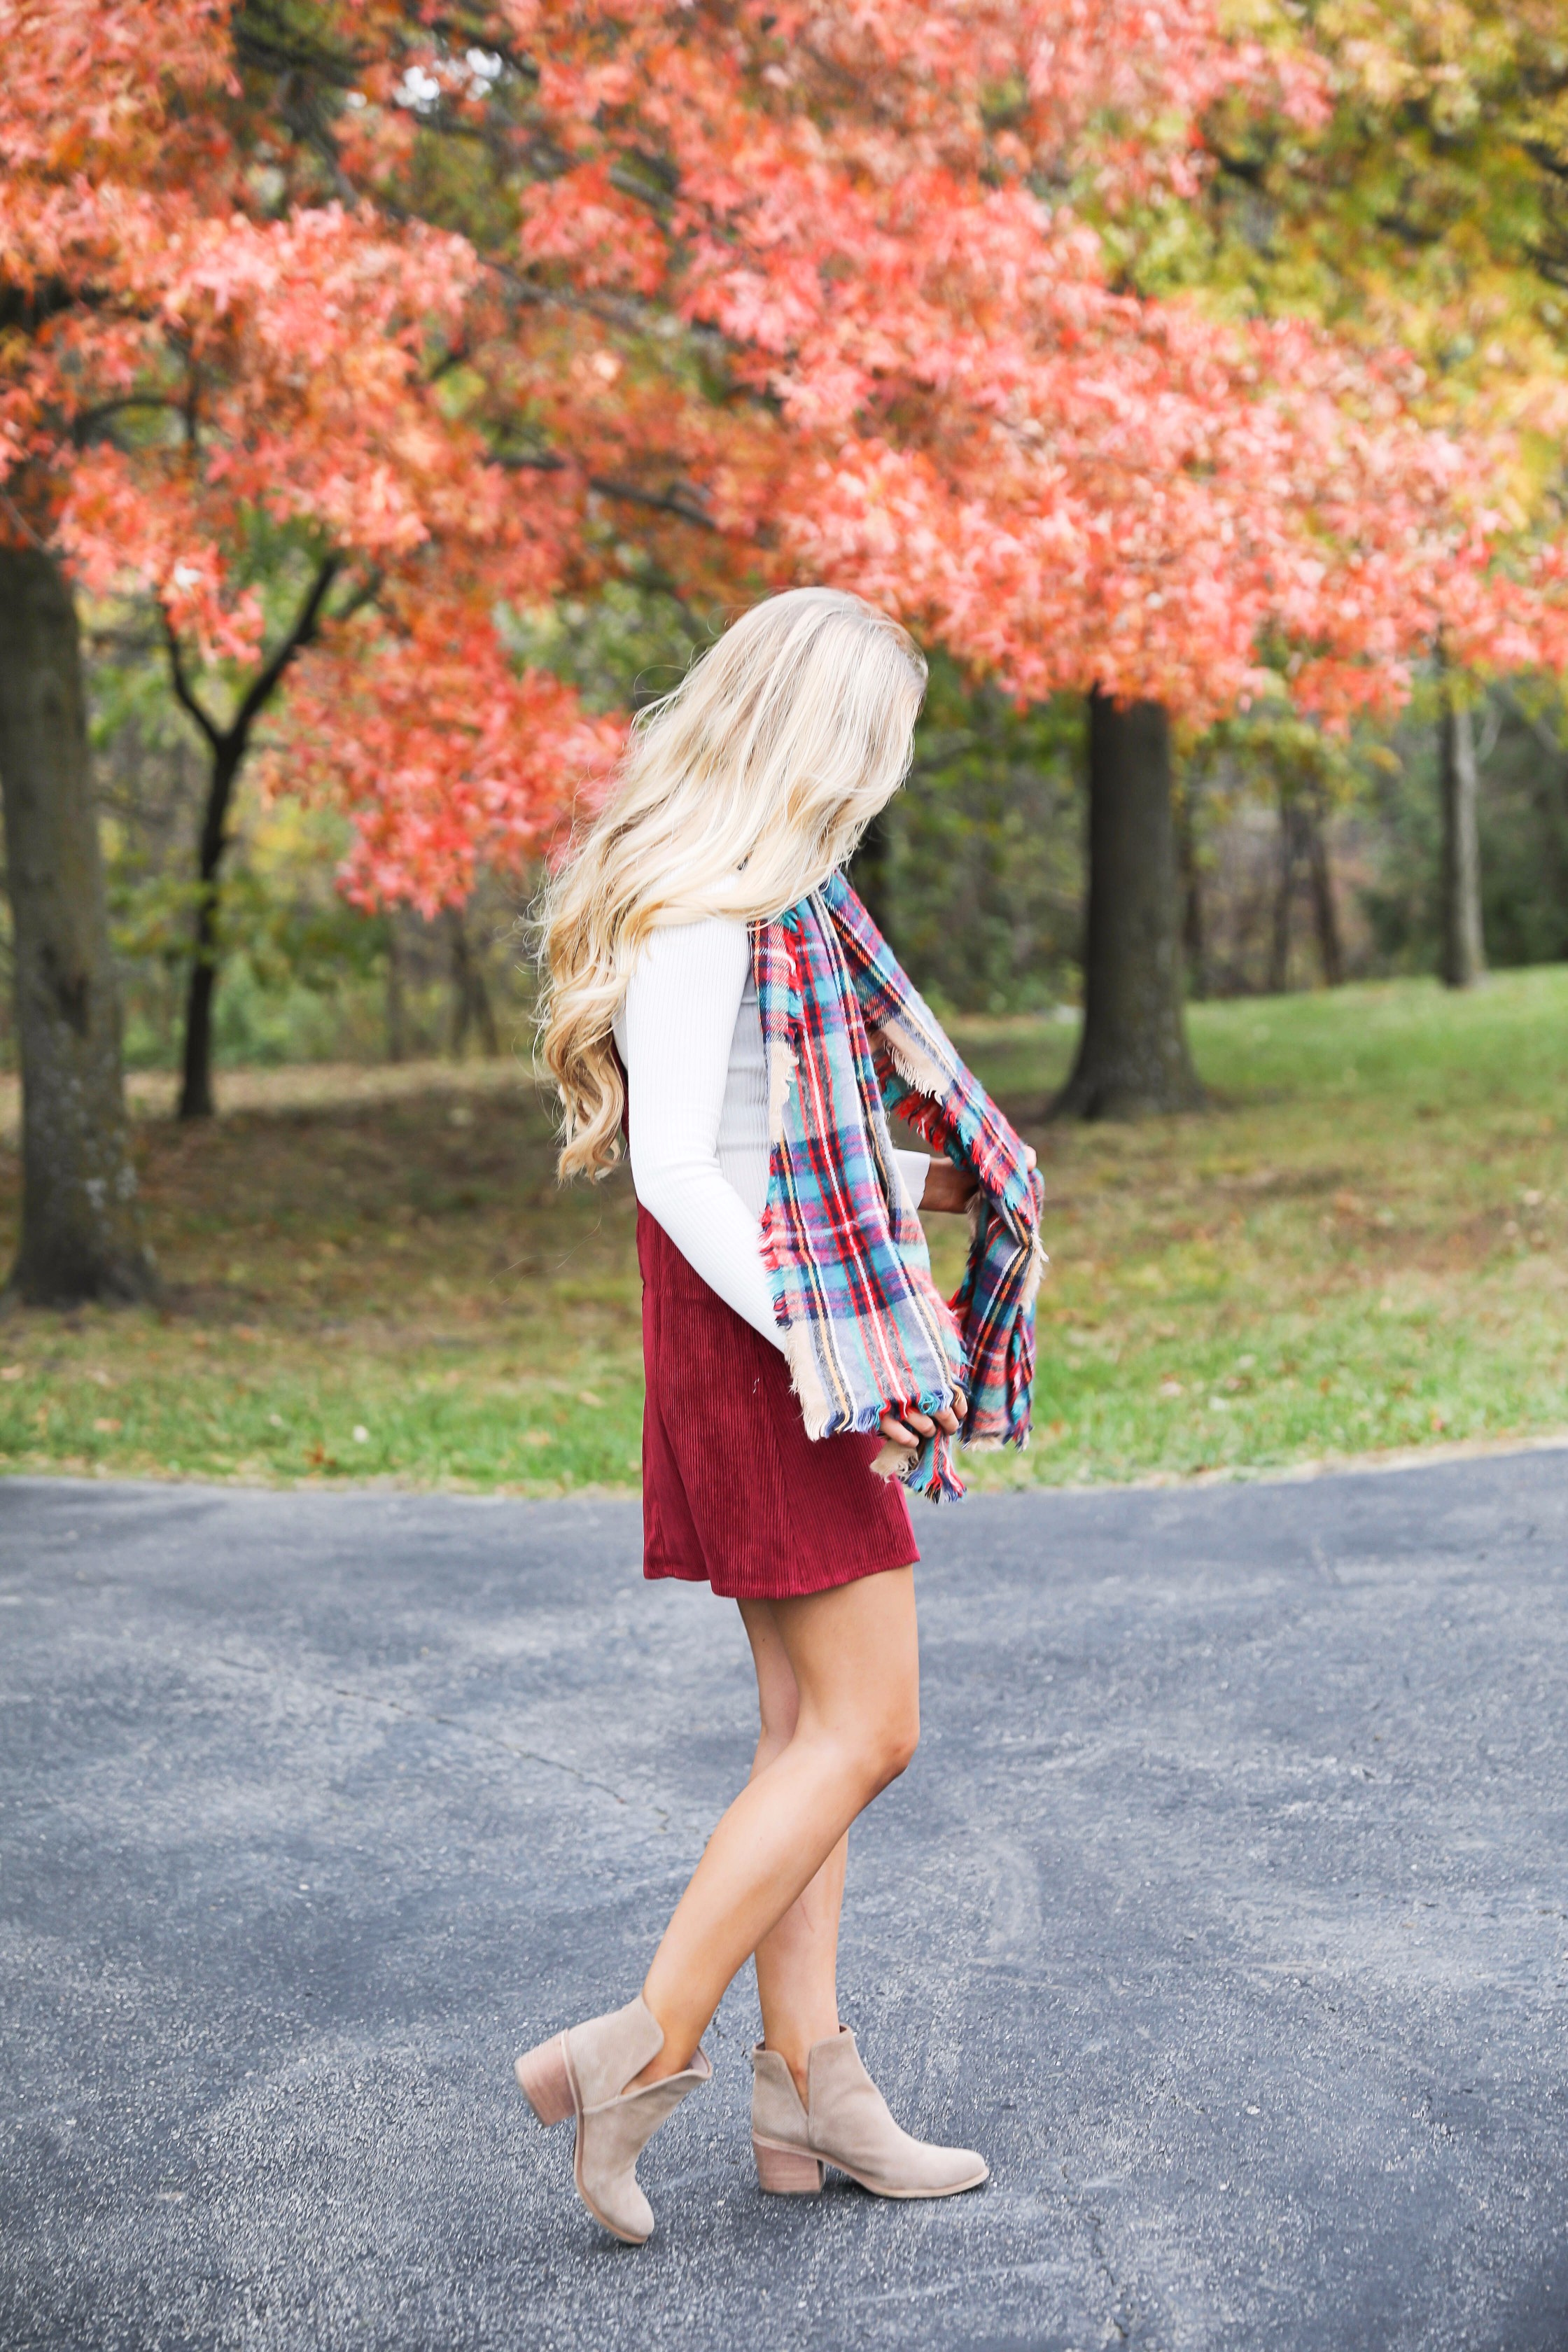 Red corduroy overall dress with white turtleneck and blanket scarf! The cutest fall outfit for a fall trees and foliage photoshoot! Get details on fashion blog daily dose of charm lauren lindmark